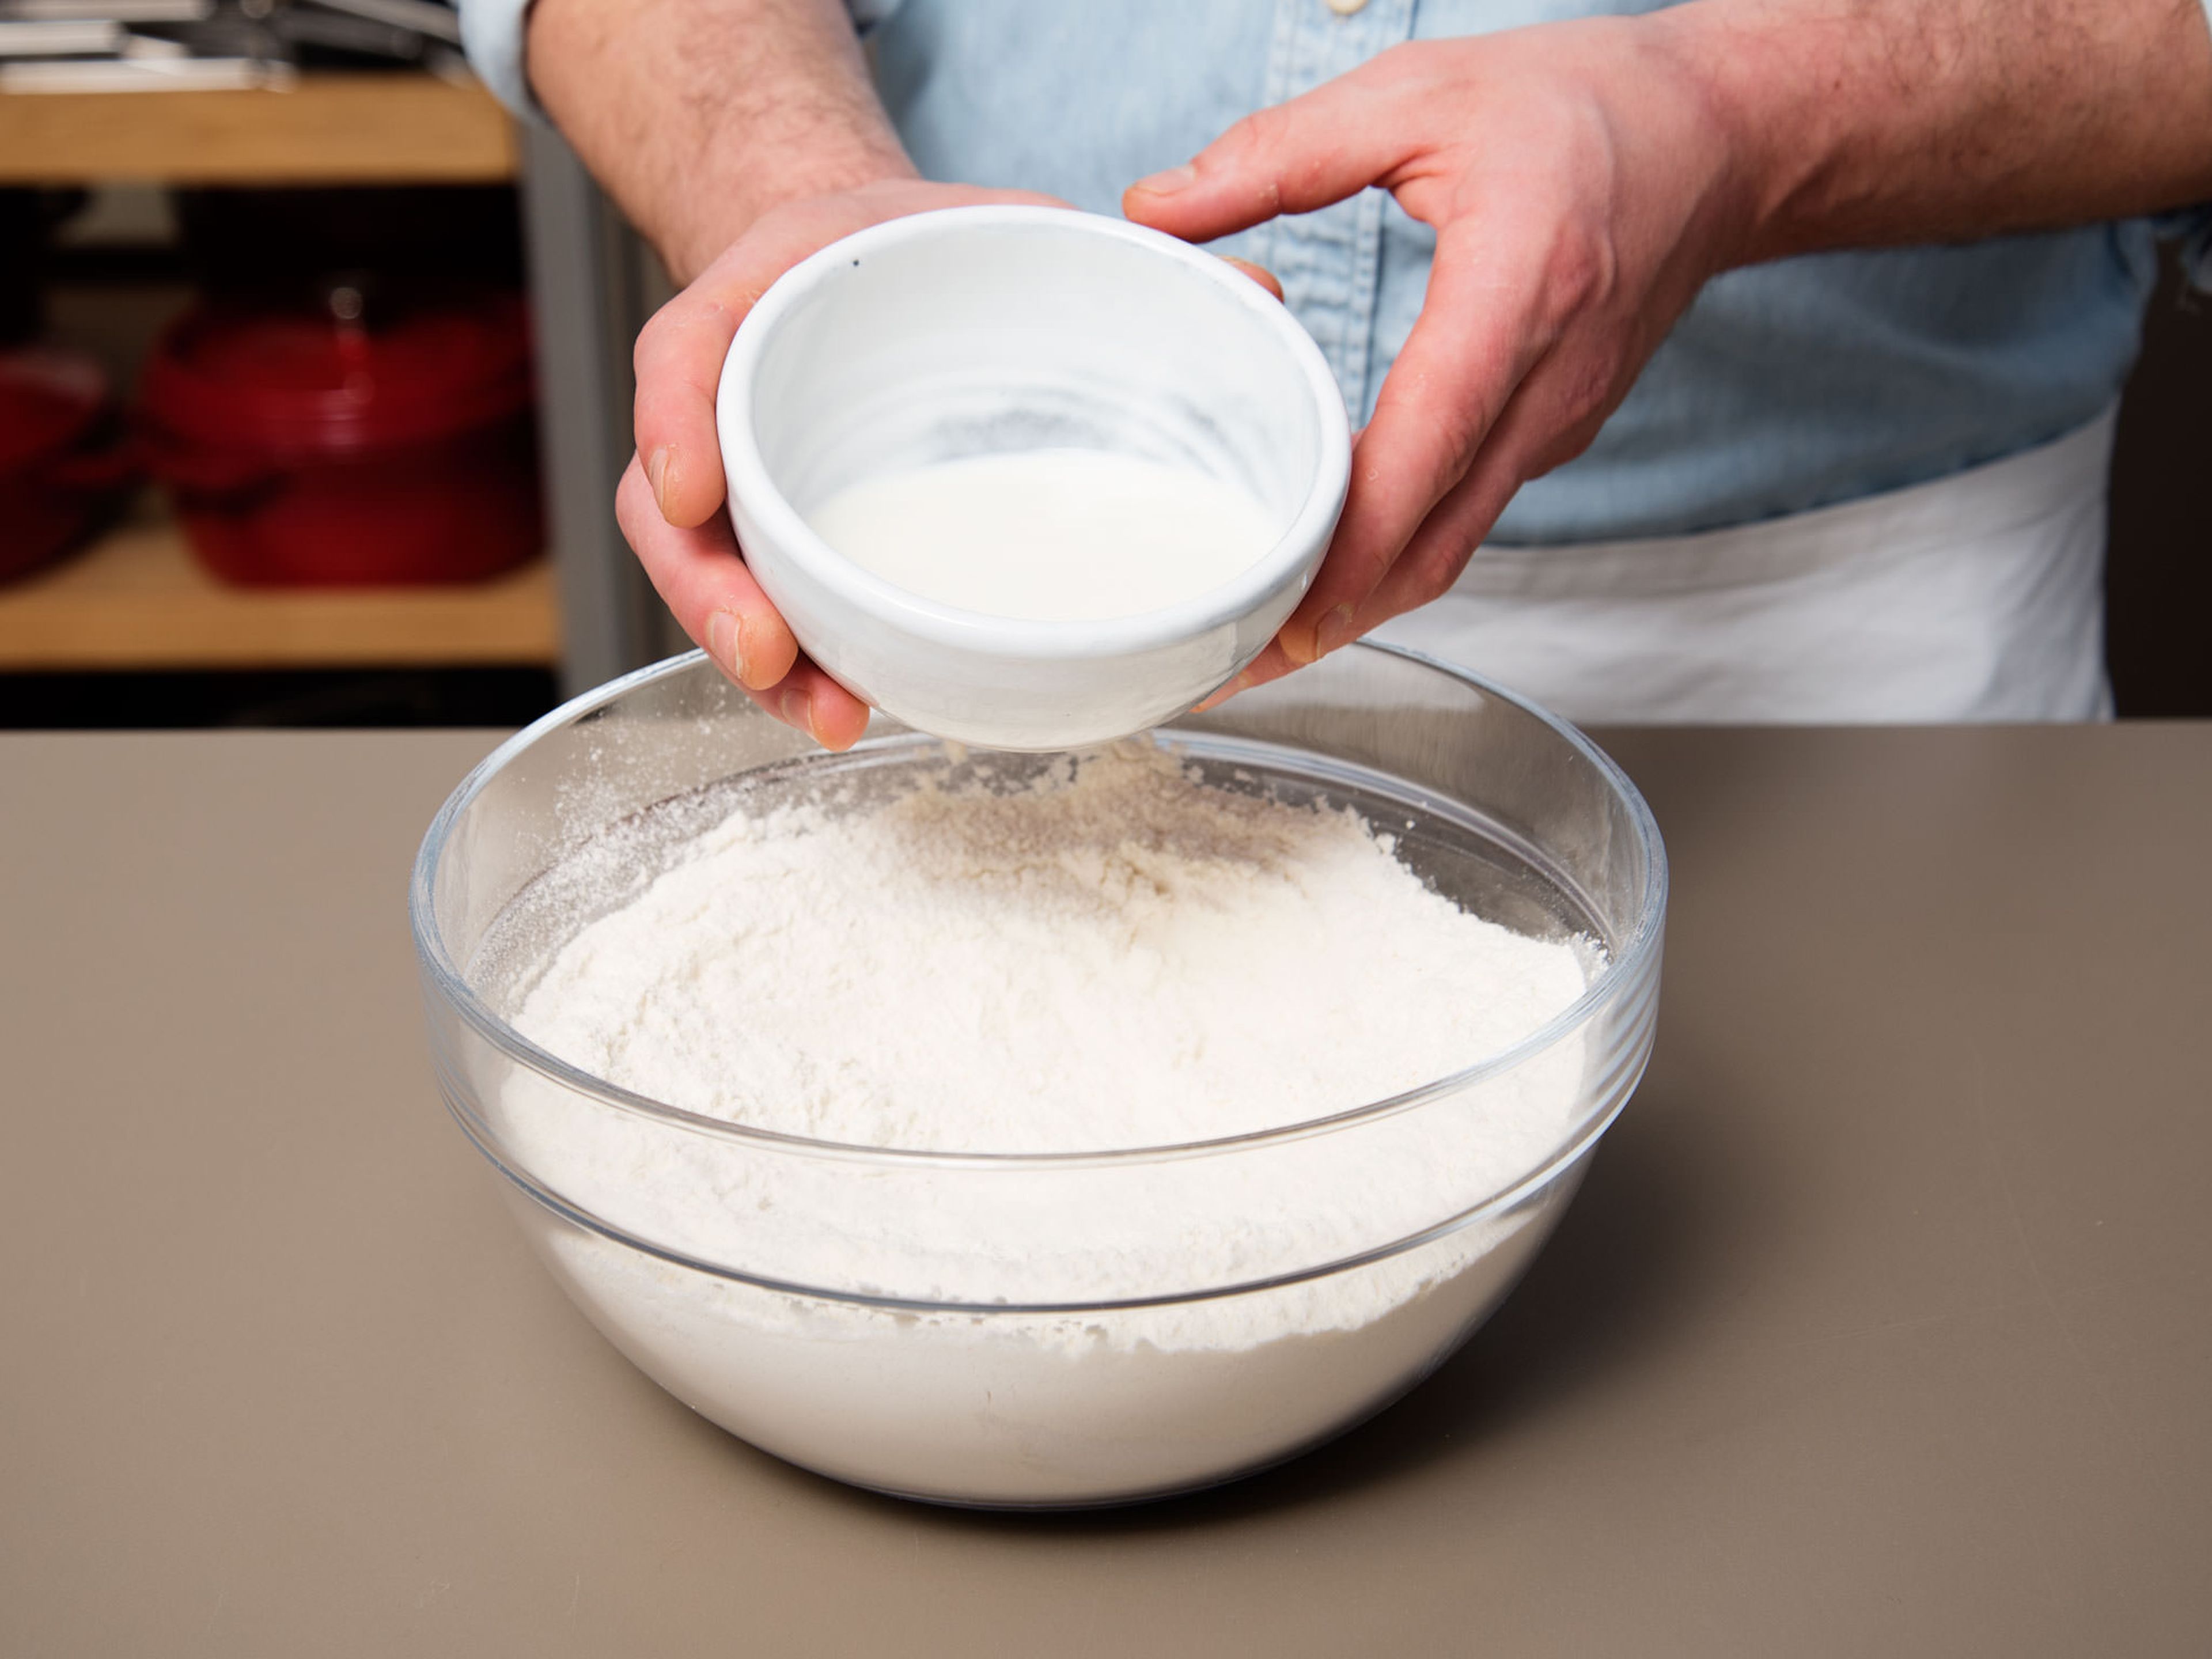 Add flour and sugar to a bowl and stir to combine. Form a small hollow in the middle, add milk and crumble fresh yeast on top. Let rest for approx. 15 min.